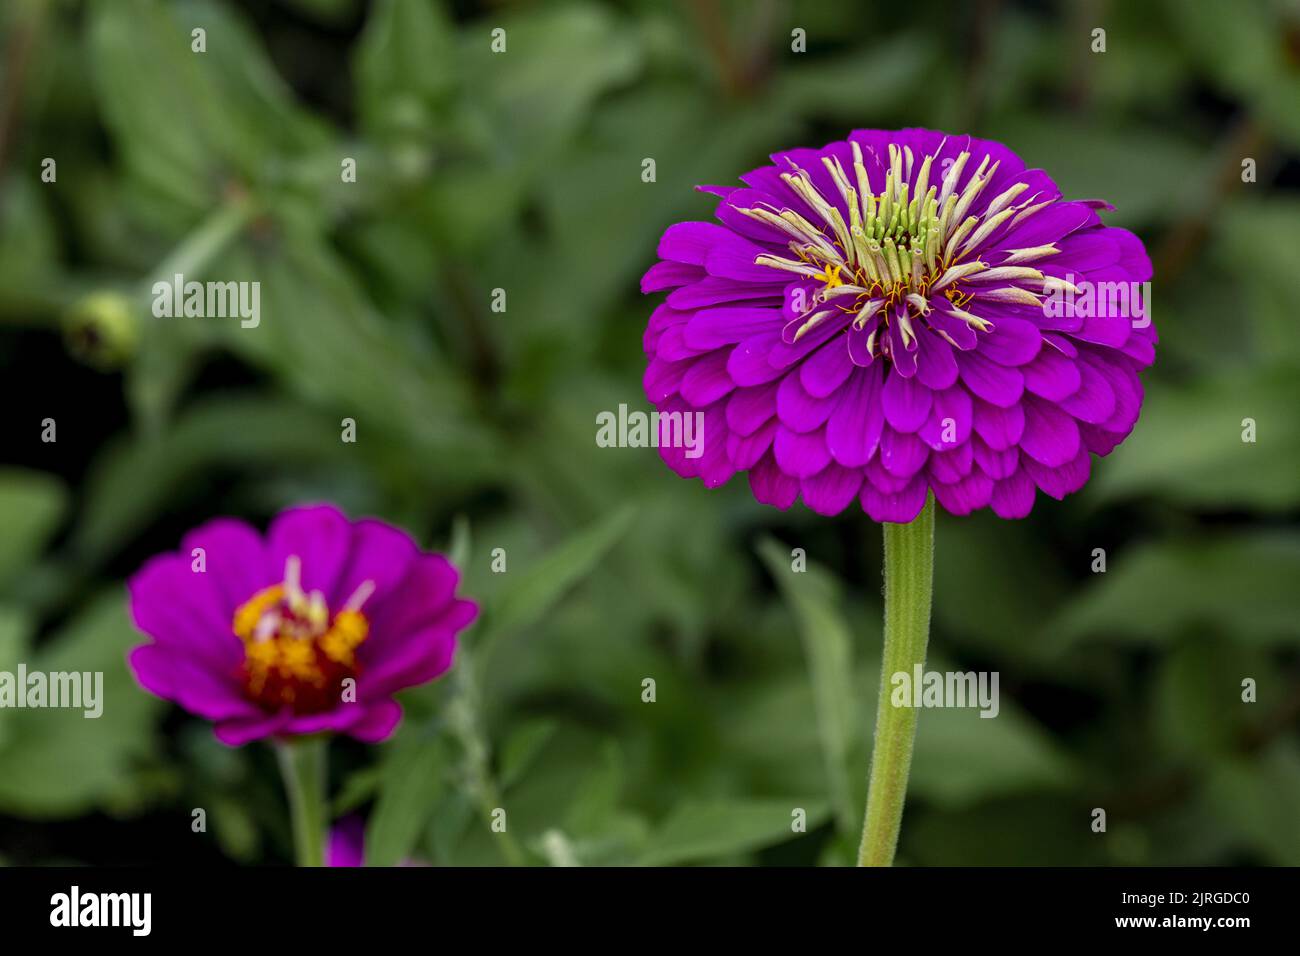 Decorative lilac flowers of Zinnia in front of the background of green leaves. Stock Photo